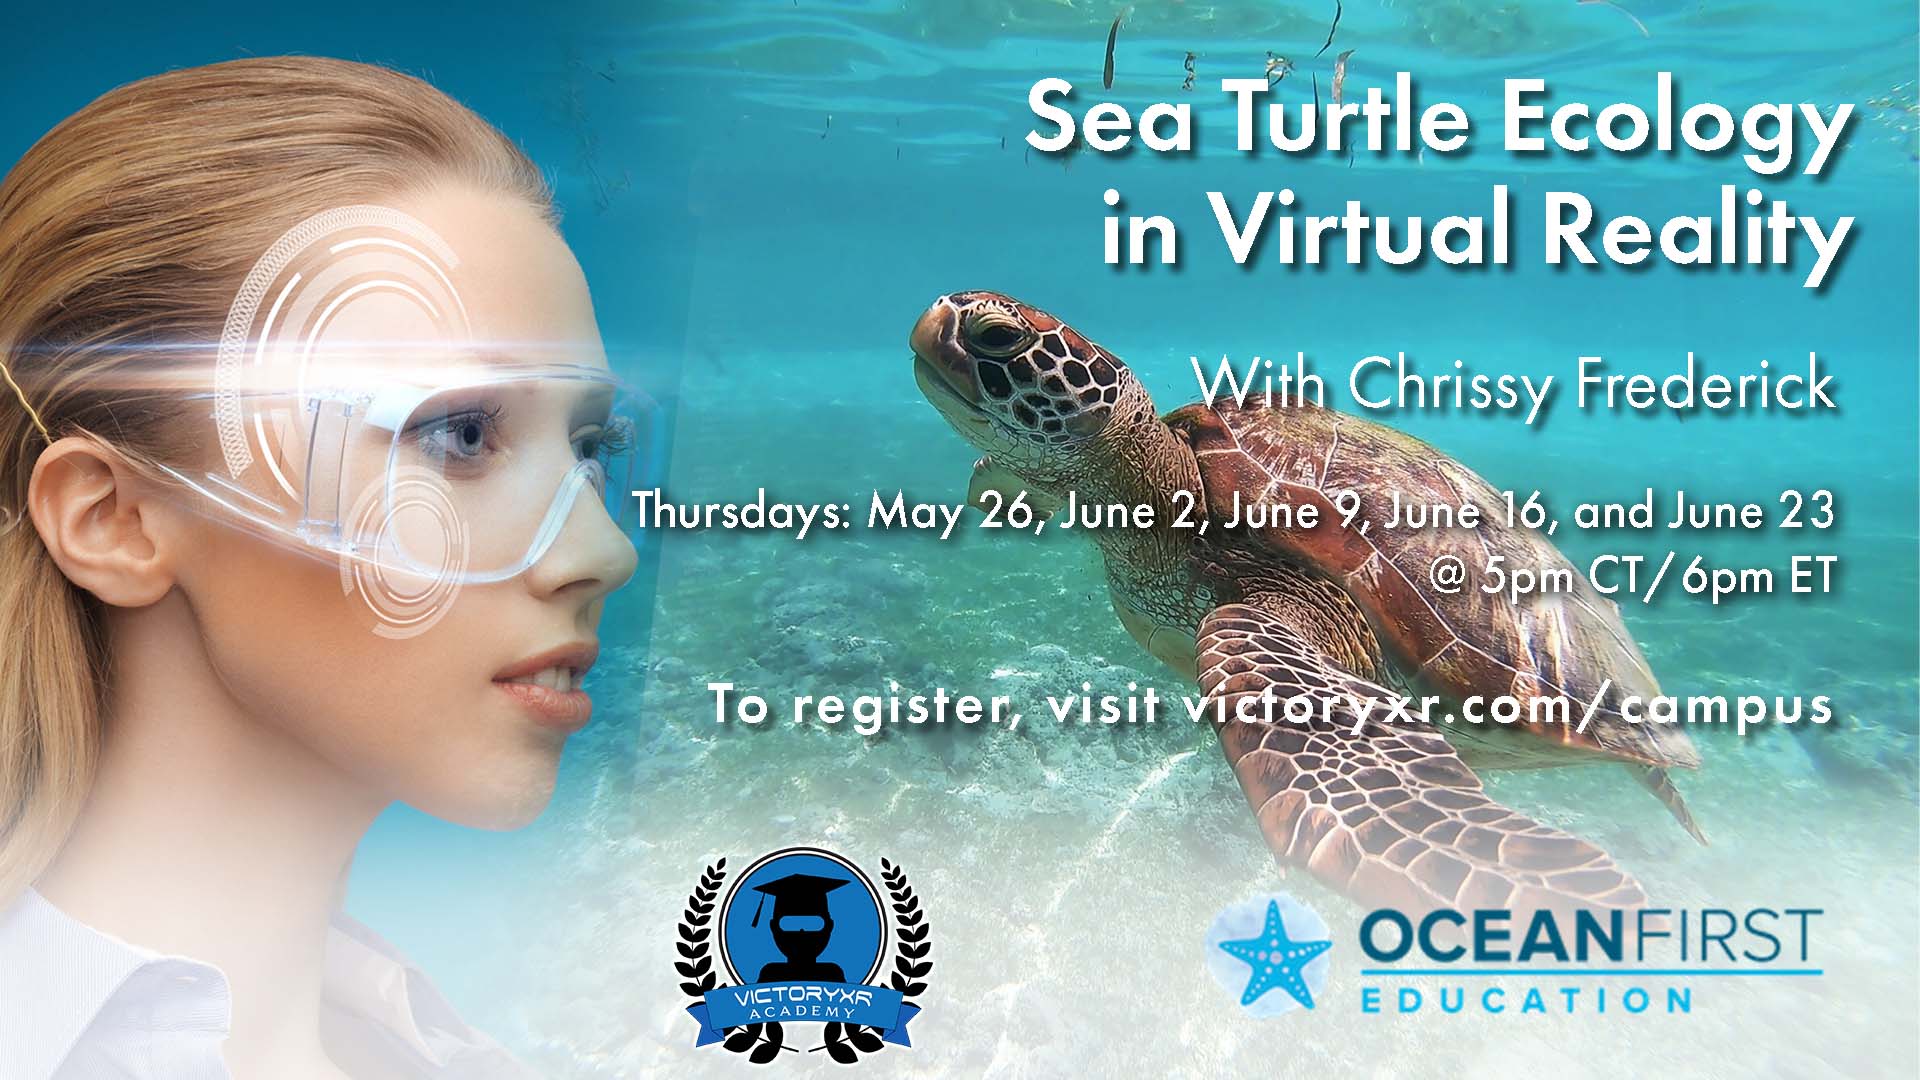 sea turtle ecology in virtual reality seminar graphic victoryxr oceanfirst education